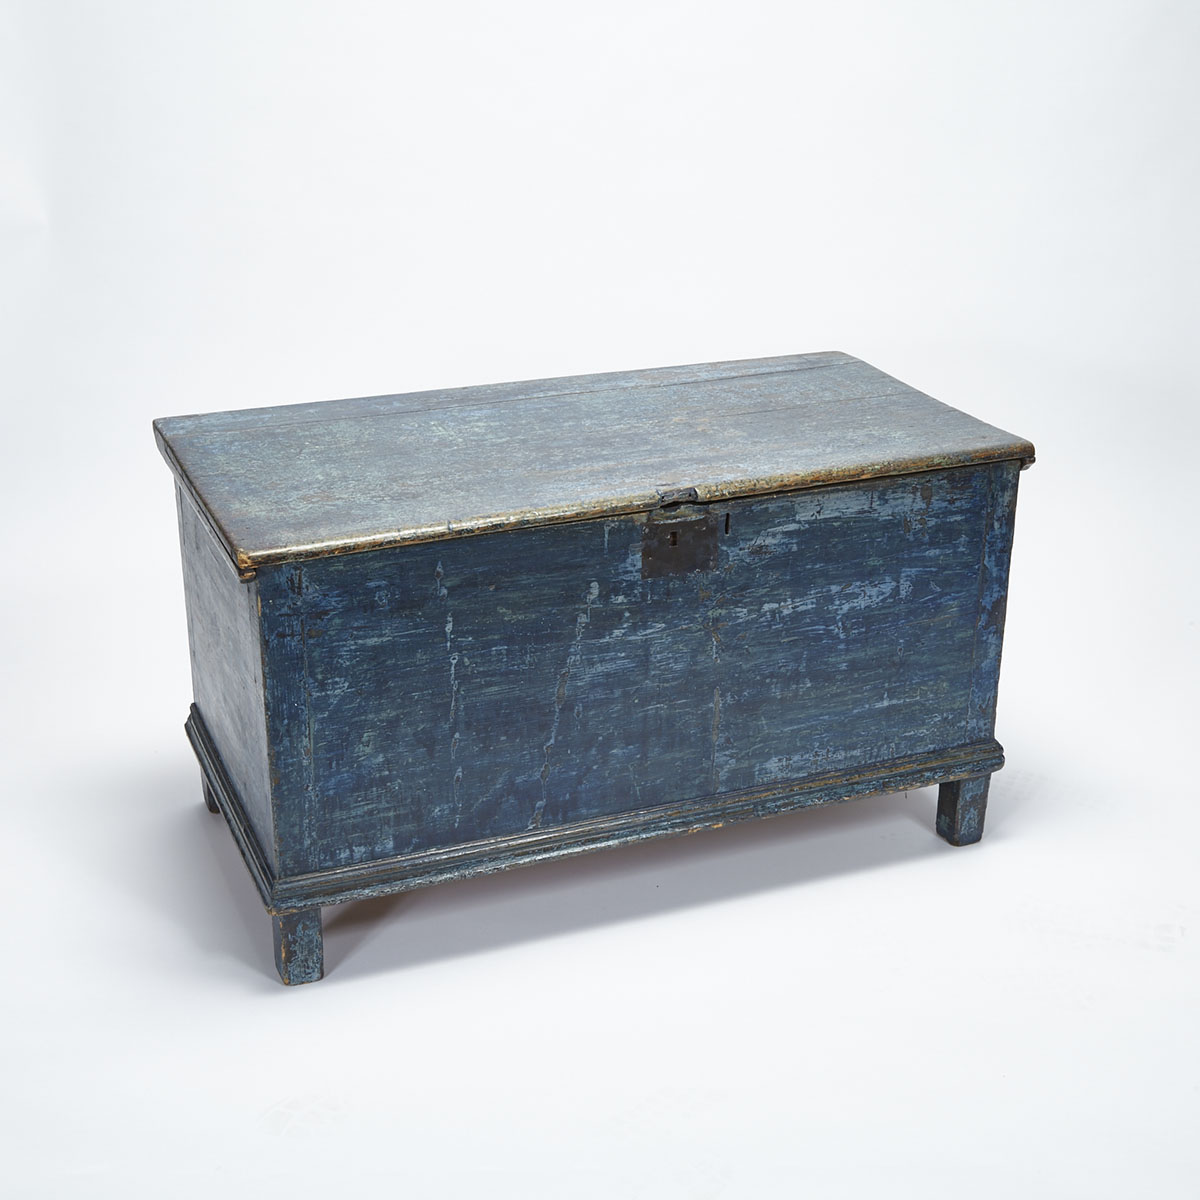 Quebec Painted Pine Blanket Box, early 19th century